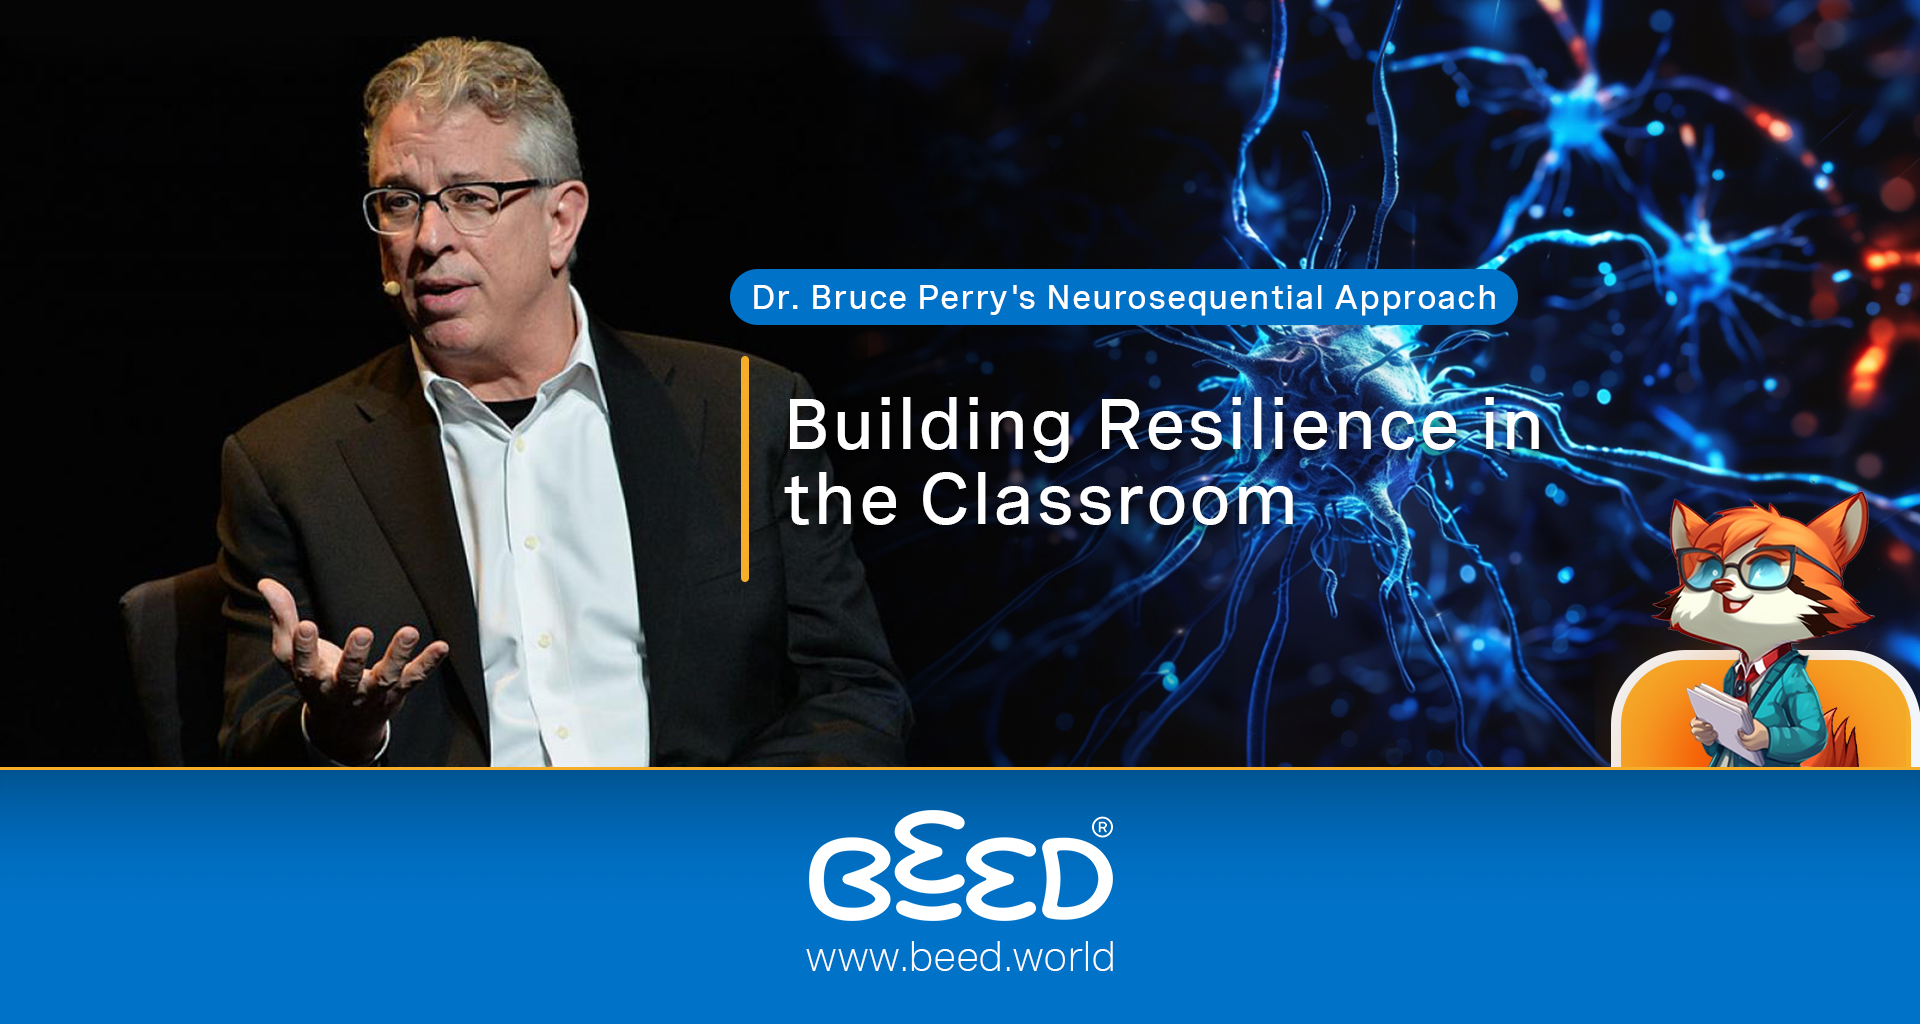 Building Resilience in the Classroom - Dr. Bruce Perry's Neurosequential Approach